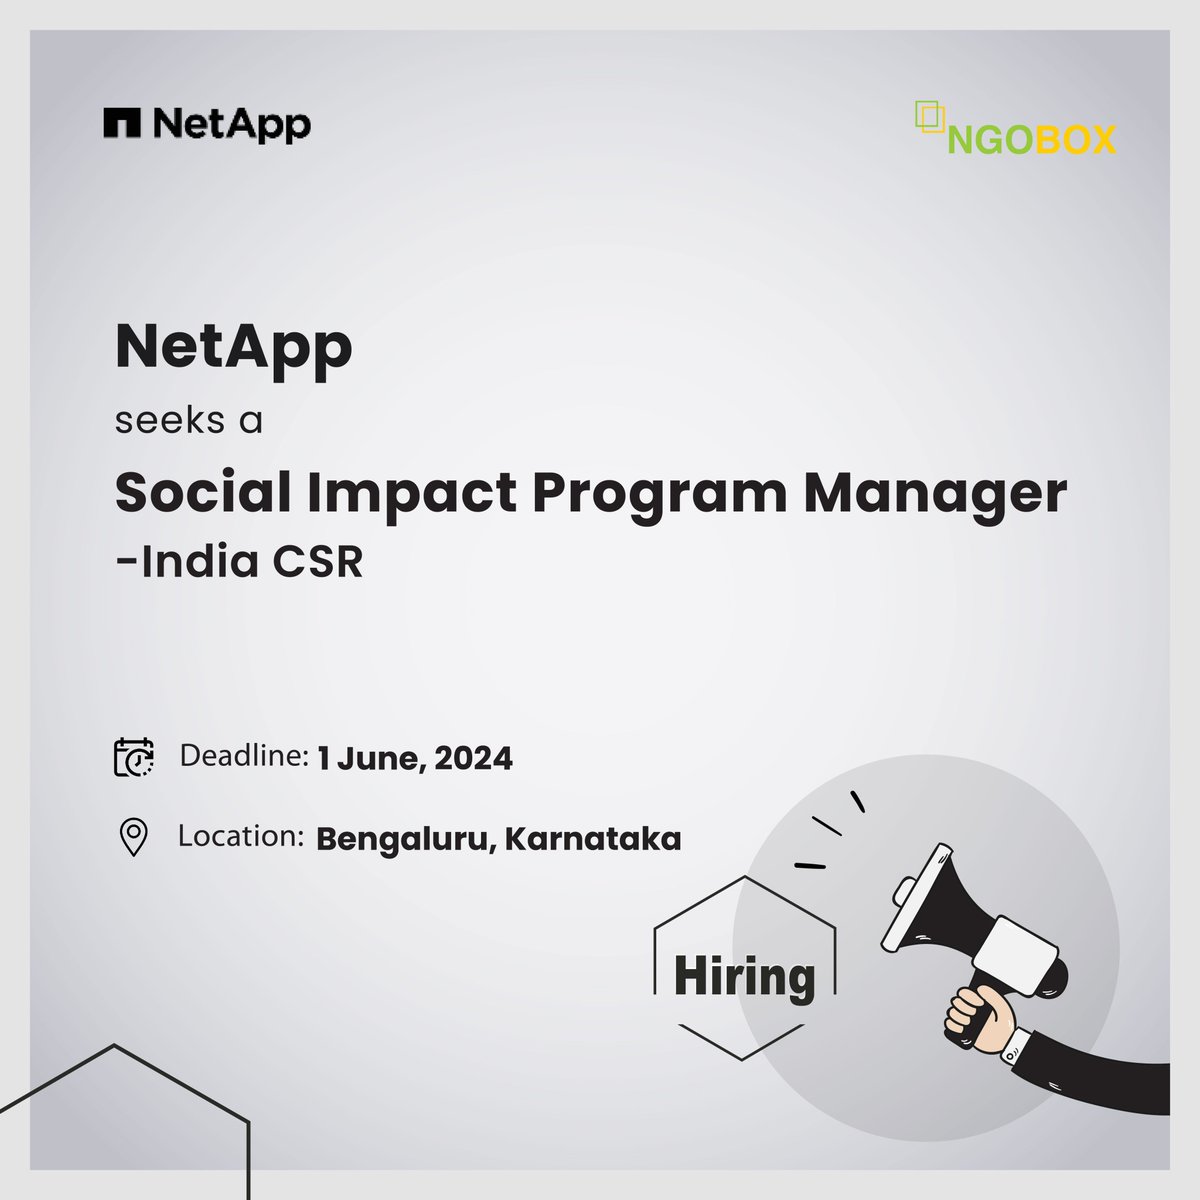 #JobOpening @NetAppIndia seeks a Social Impact Program Manager - India CSR Required: Minimum of 5 years of experience in managing CSR initiatives and ensuring compliance with India’s CSR laws. Location: Bengaluru, Karnataka Deadline: 1 June 2024 Apply: ngobox.org/job-detail_Soc…